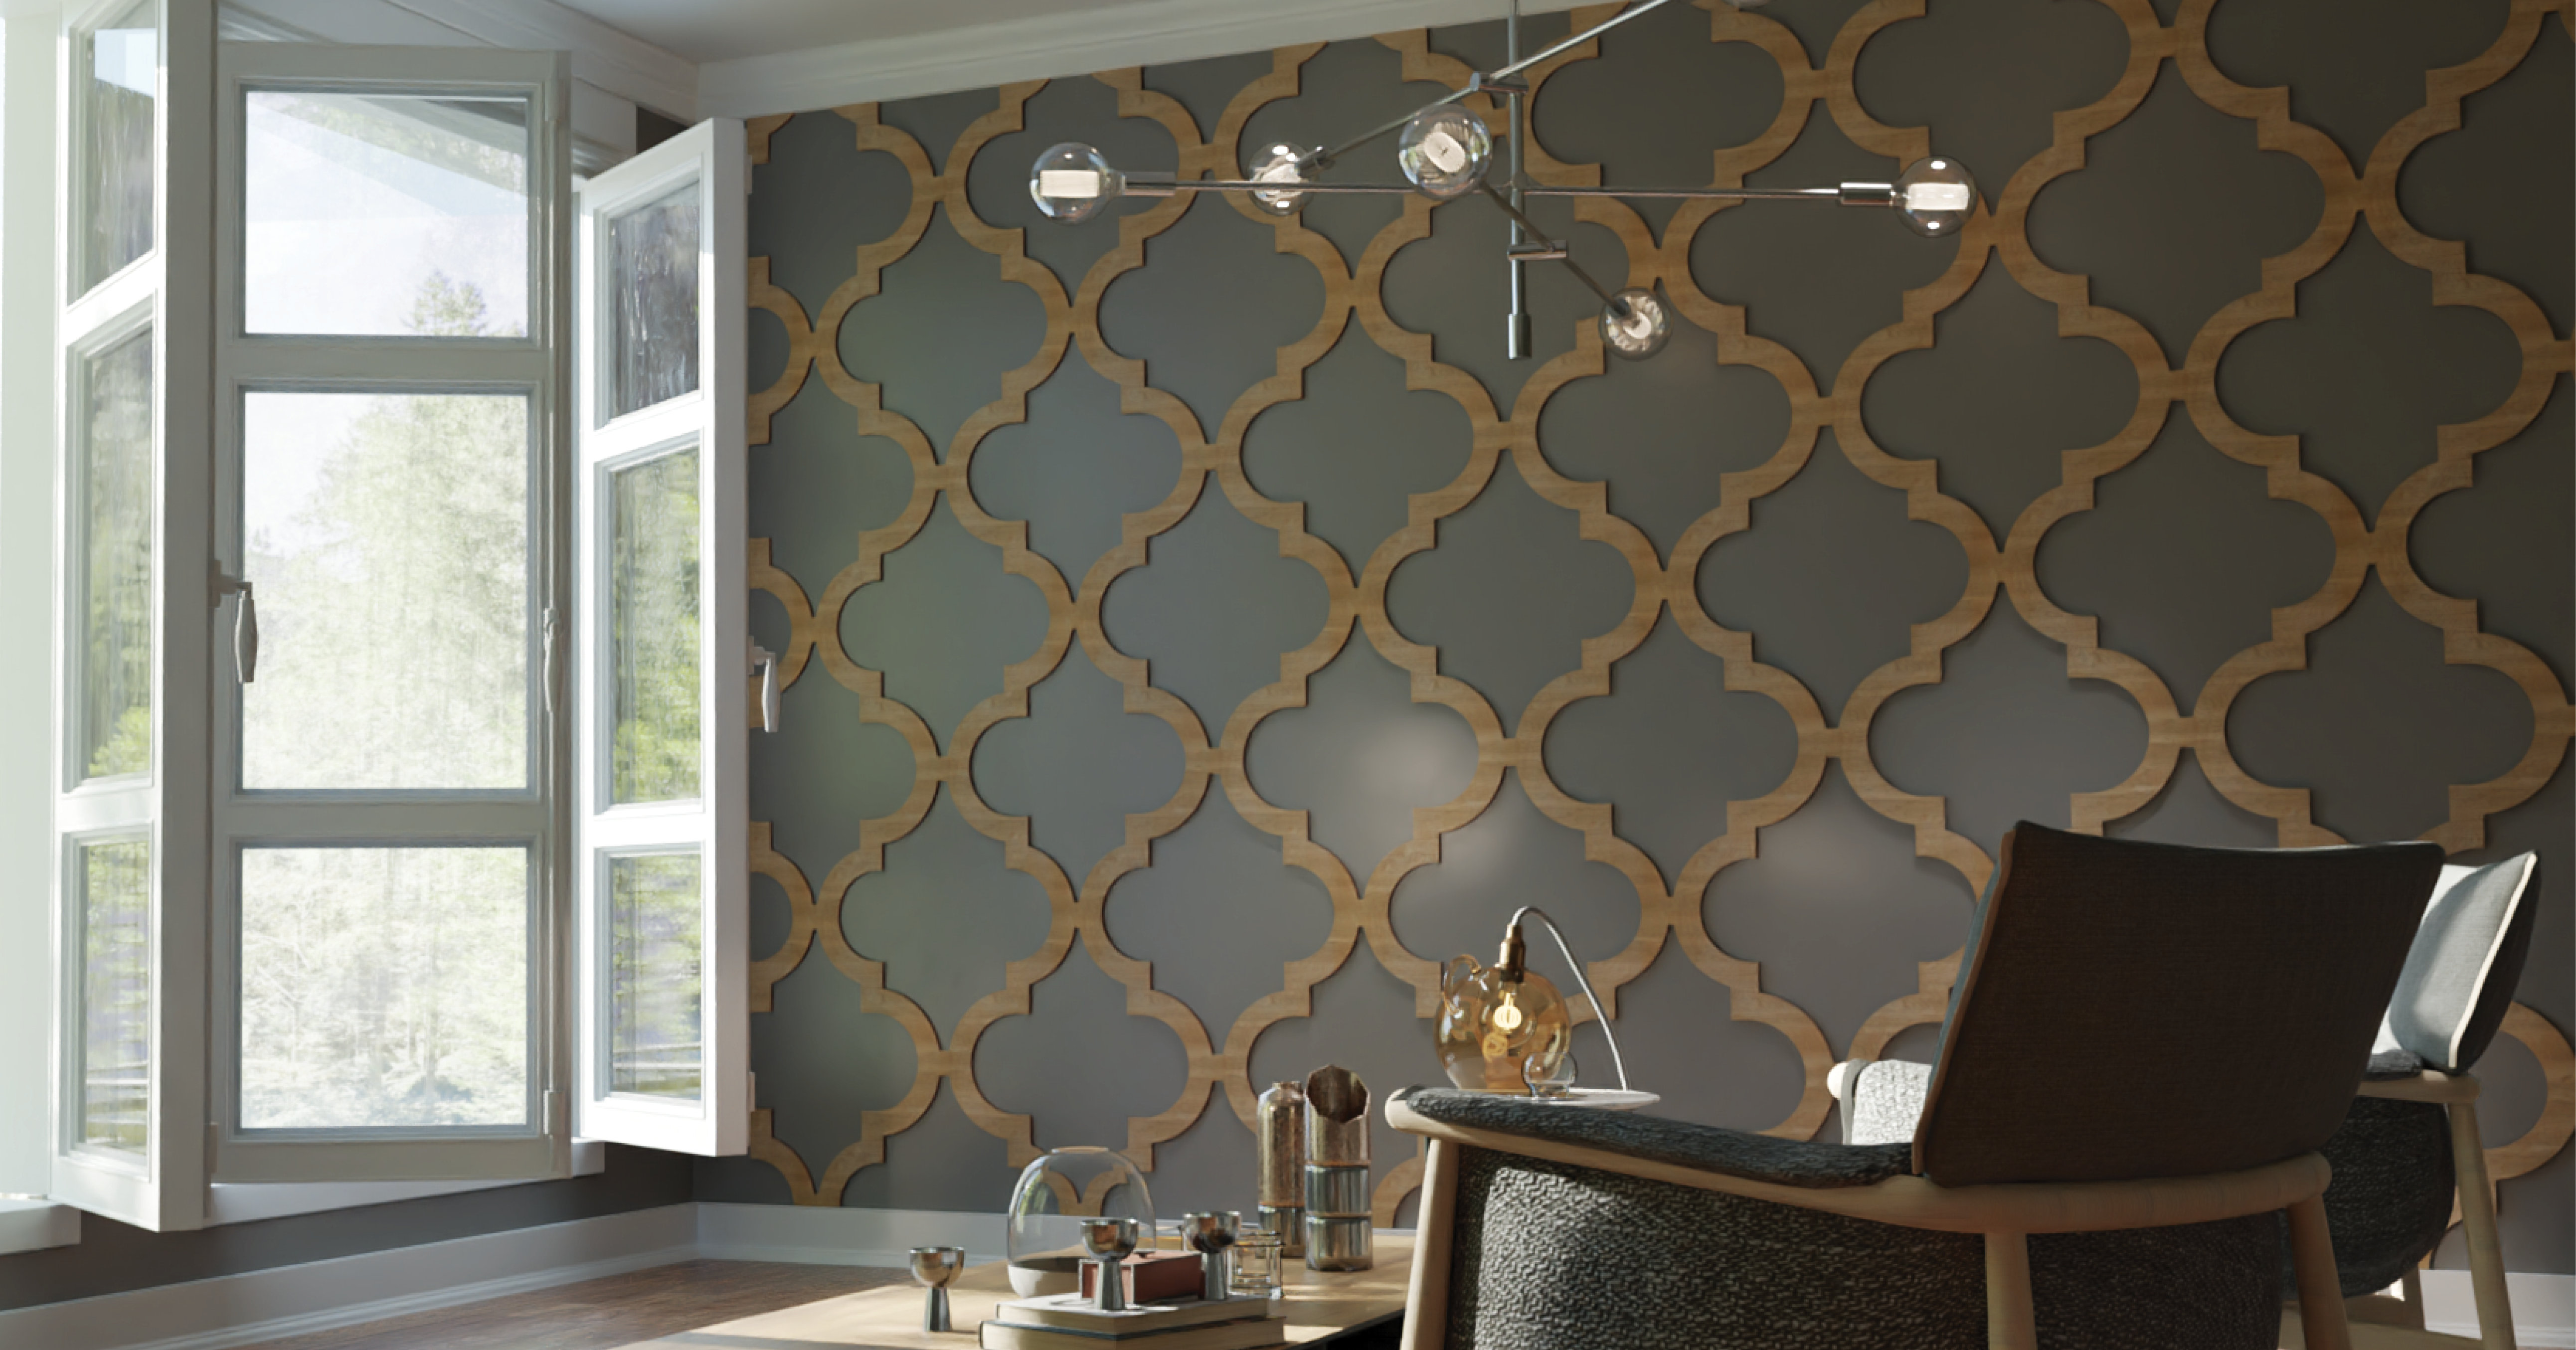 These artisan panels provide a unique, modern alternative to standard wall textures.